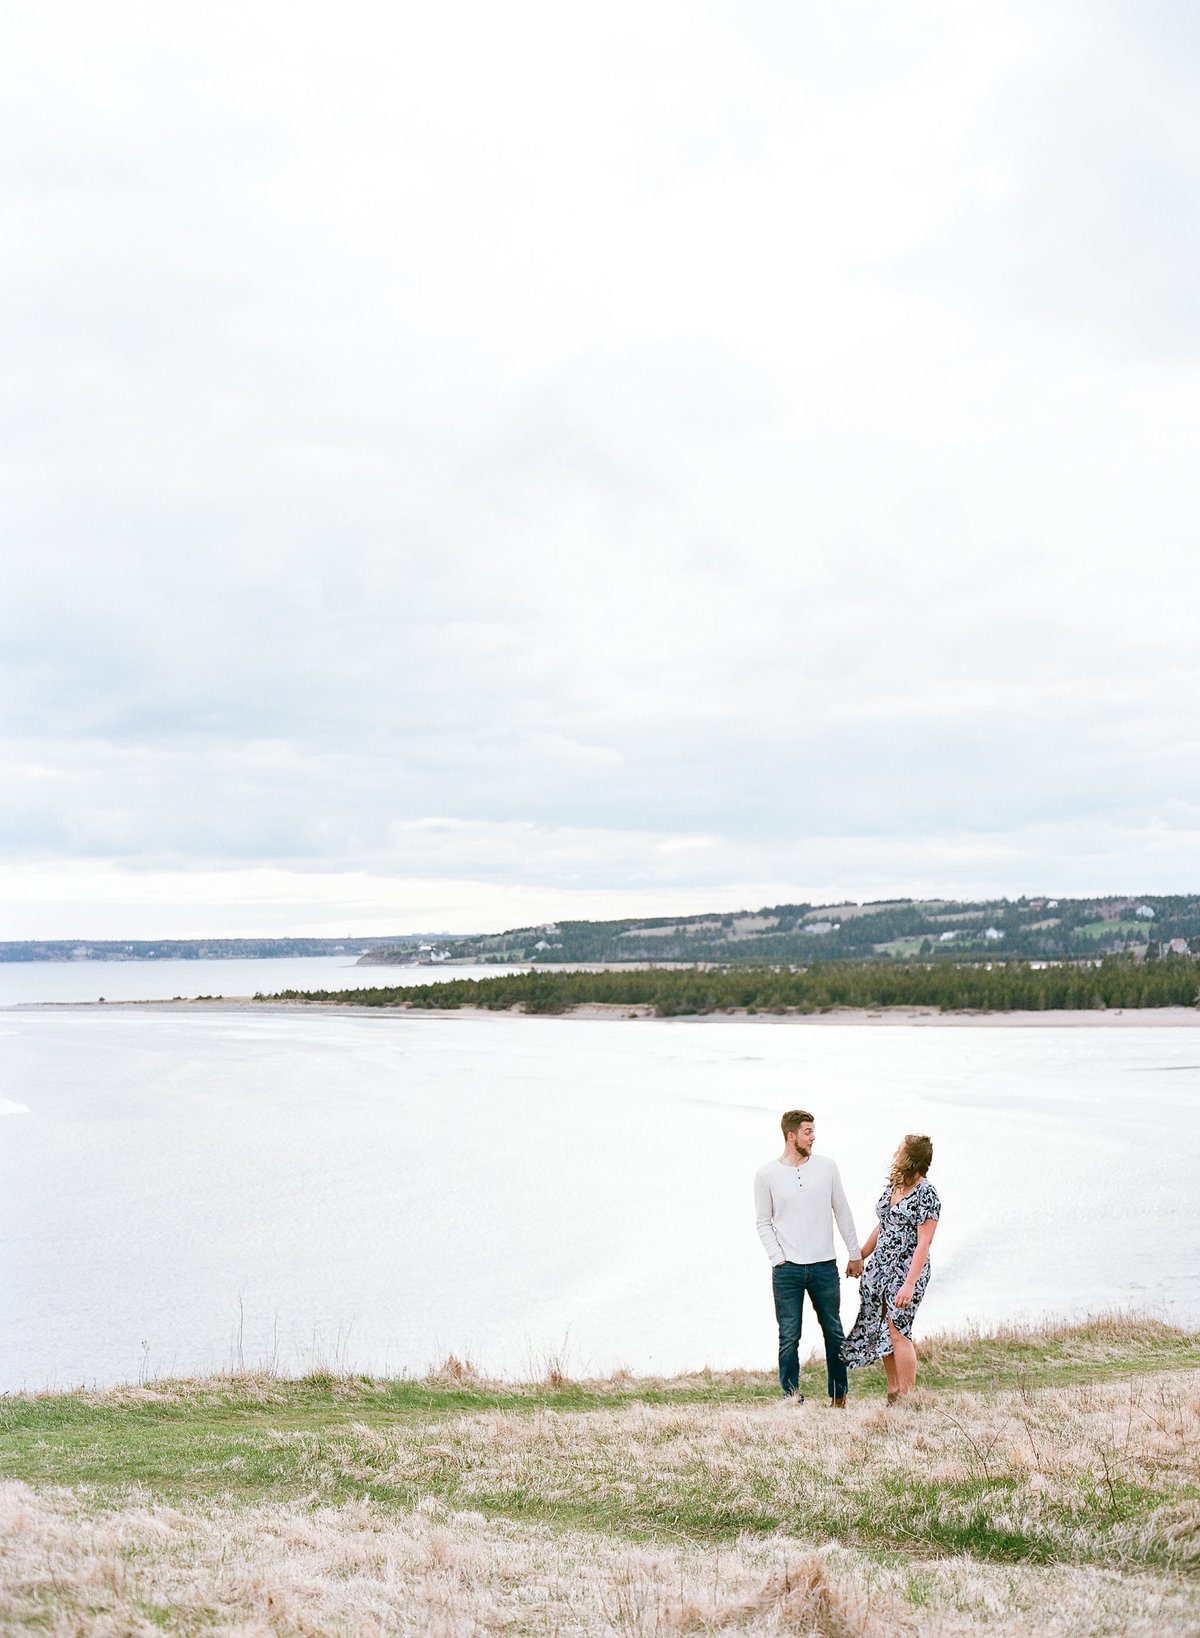 Jacqueline Anne Photography - Akayla and Andrew - Lawrencetown Beach-7